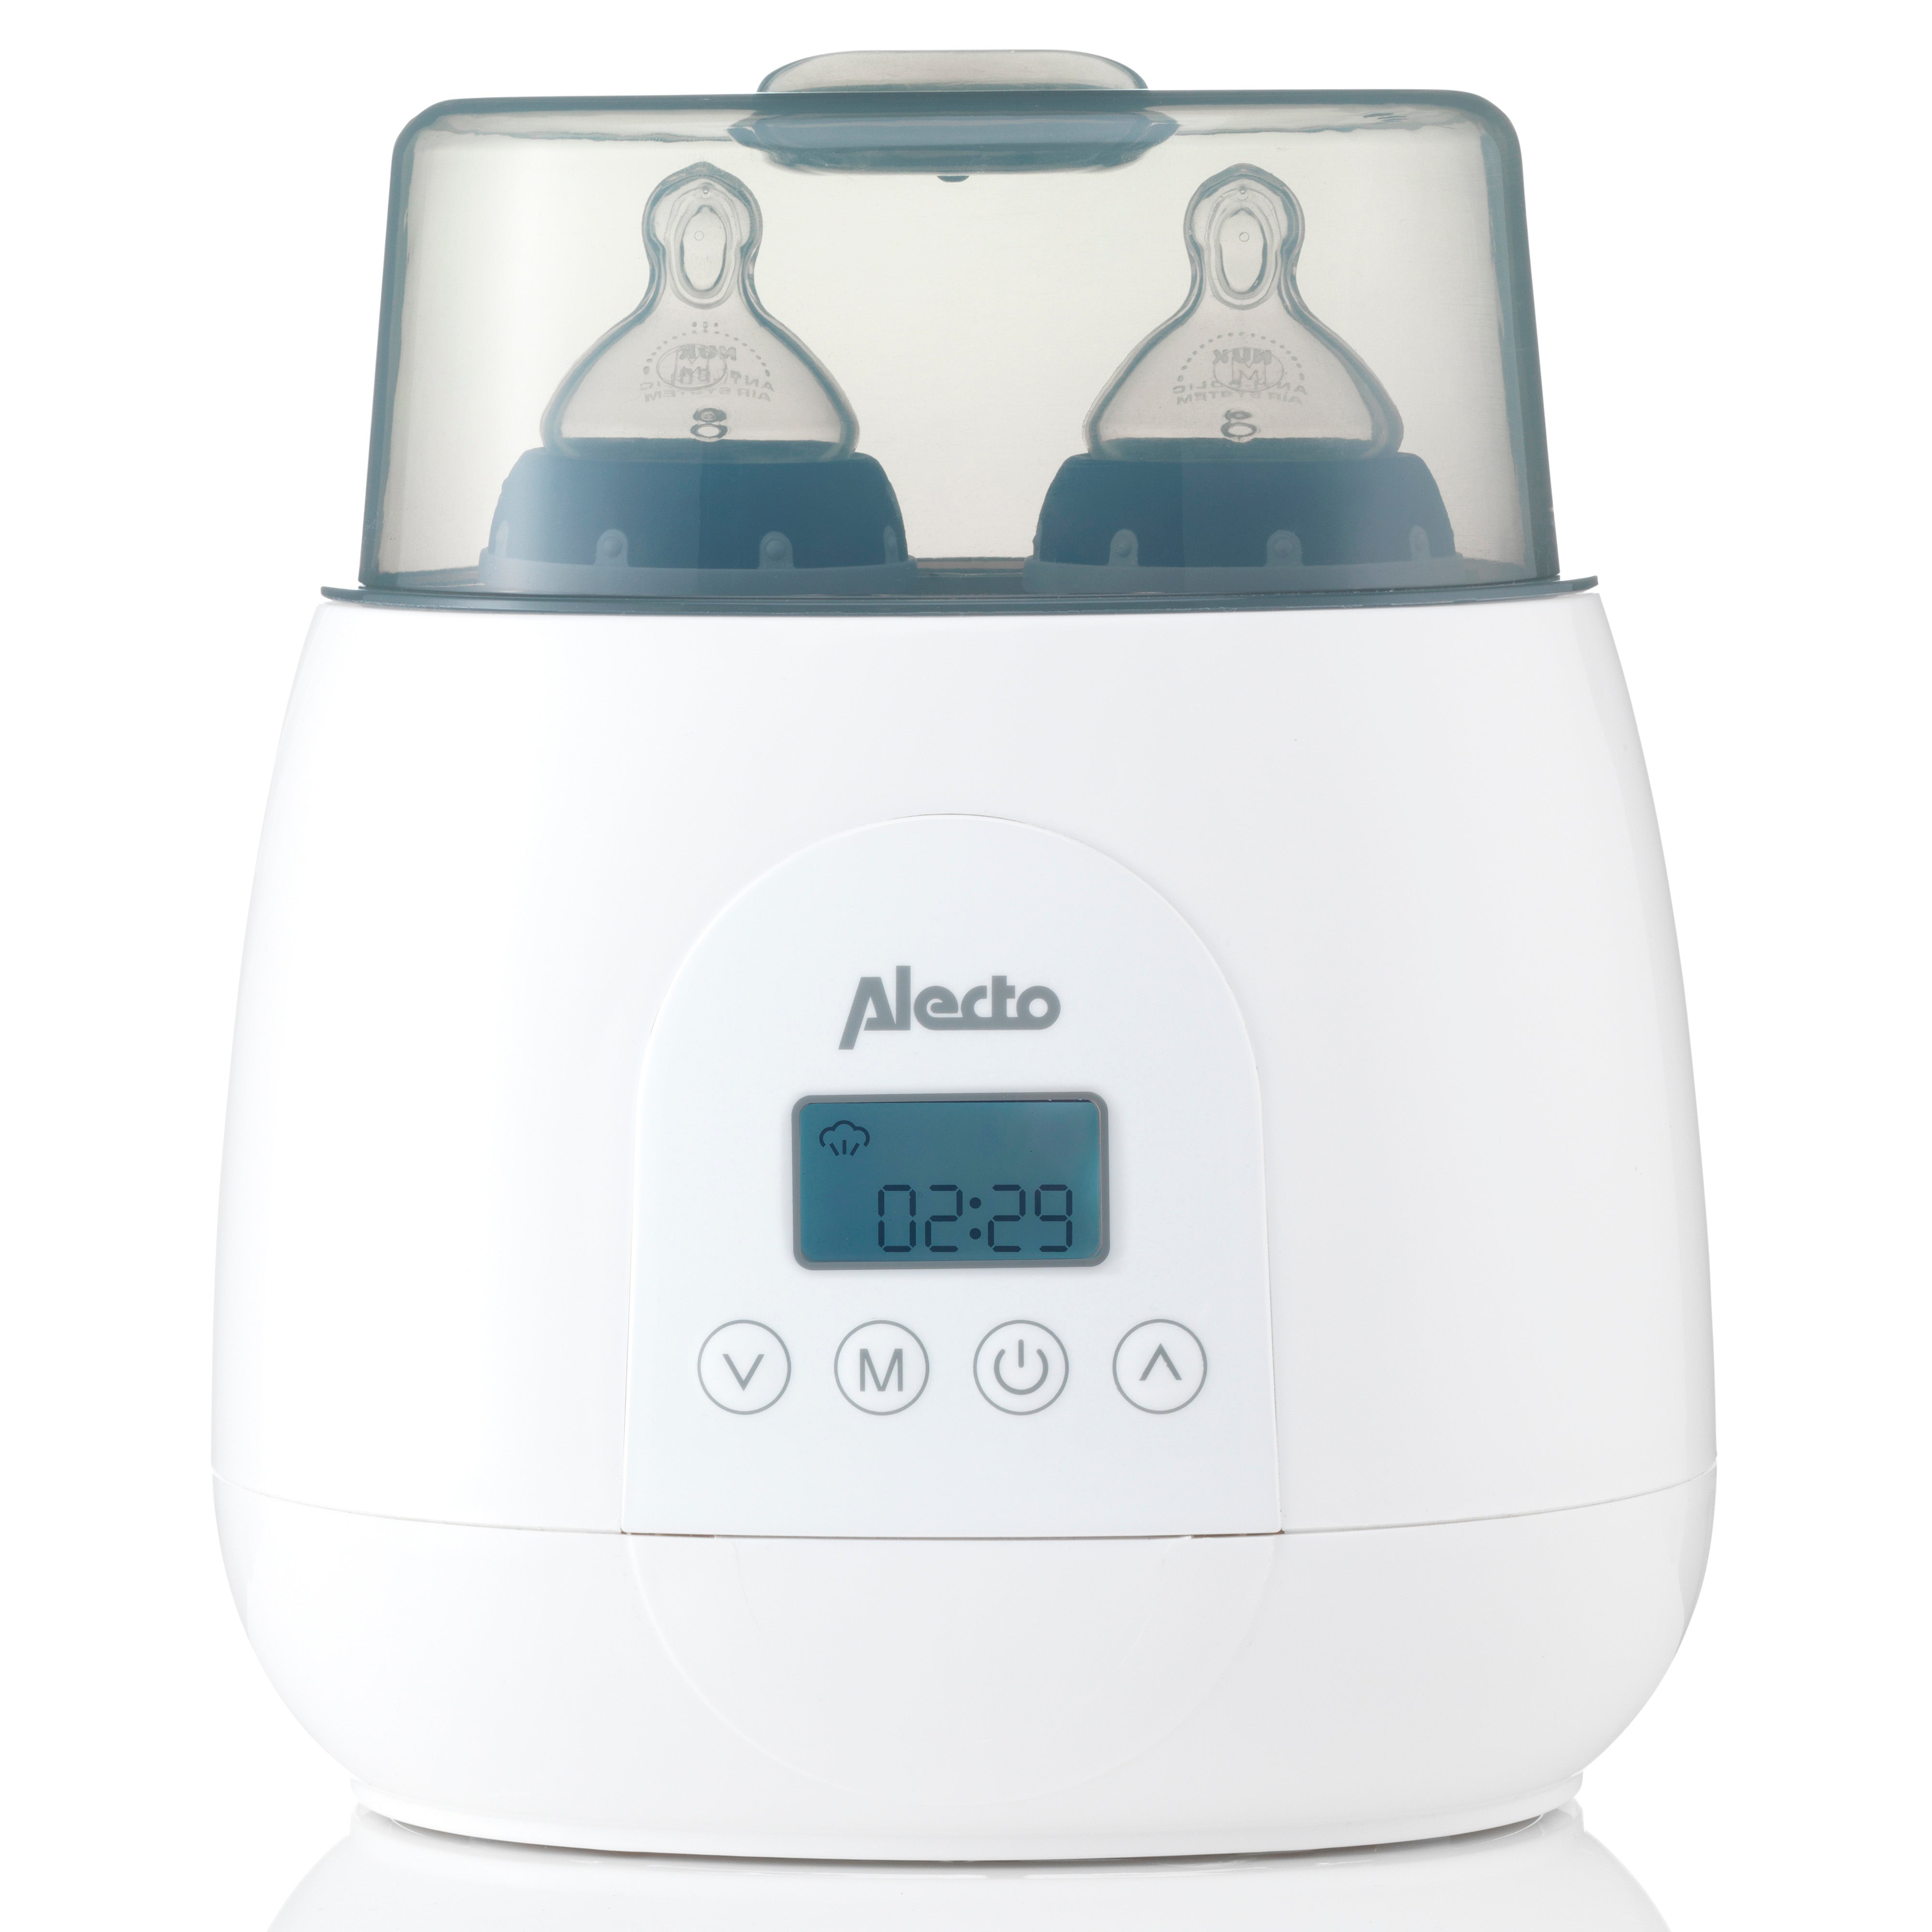 Alecto Baby BW700TWIN | Digitale dubbele flessenwarmer Alectobaby.nl